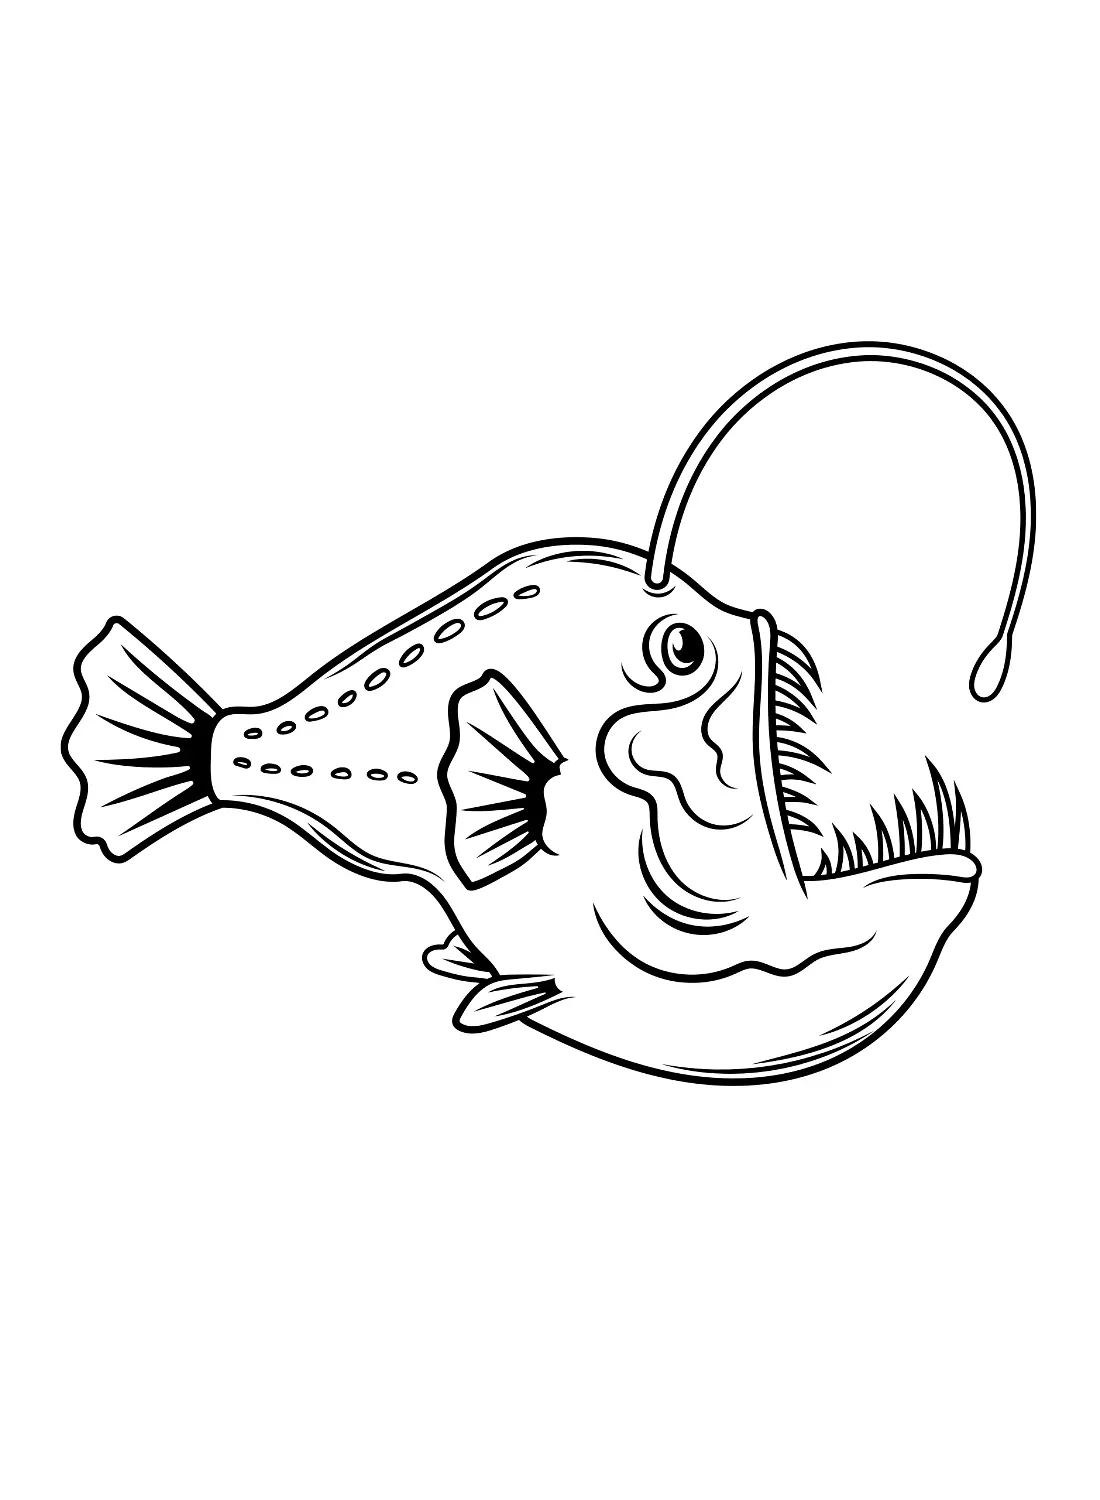 Anglerfish Coloring Pages